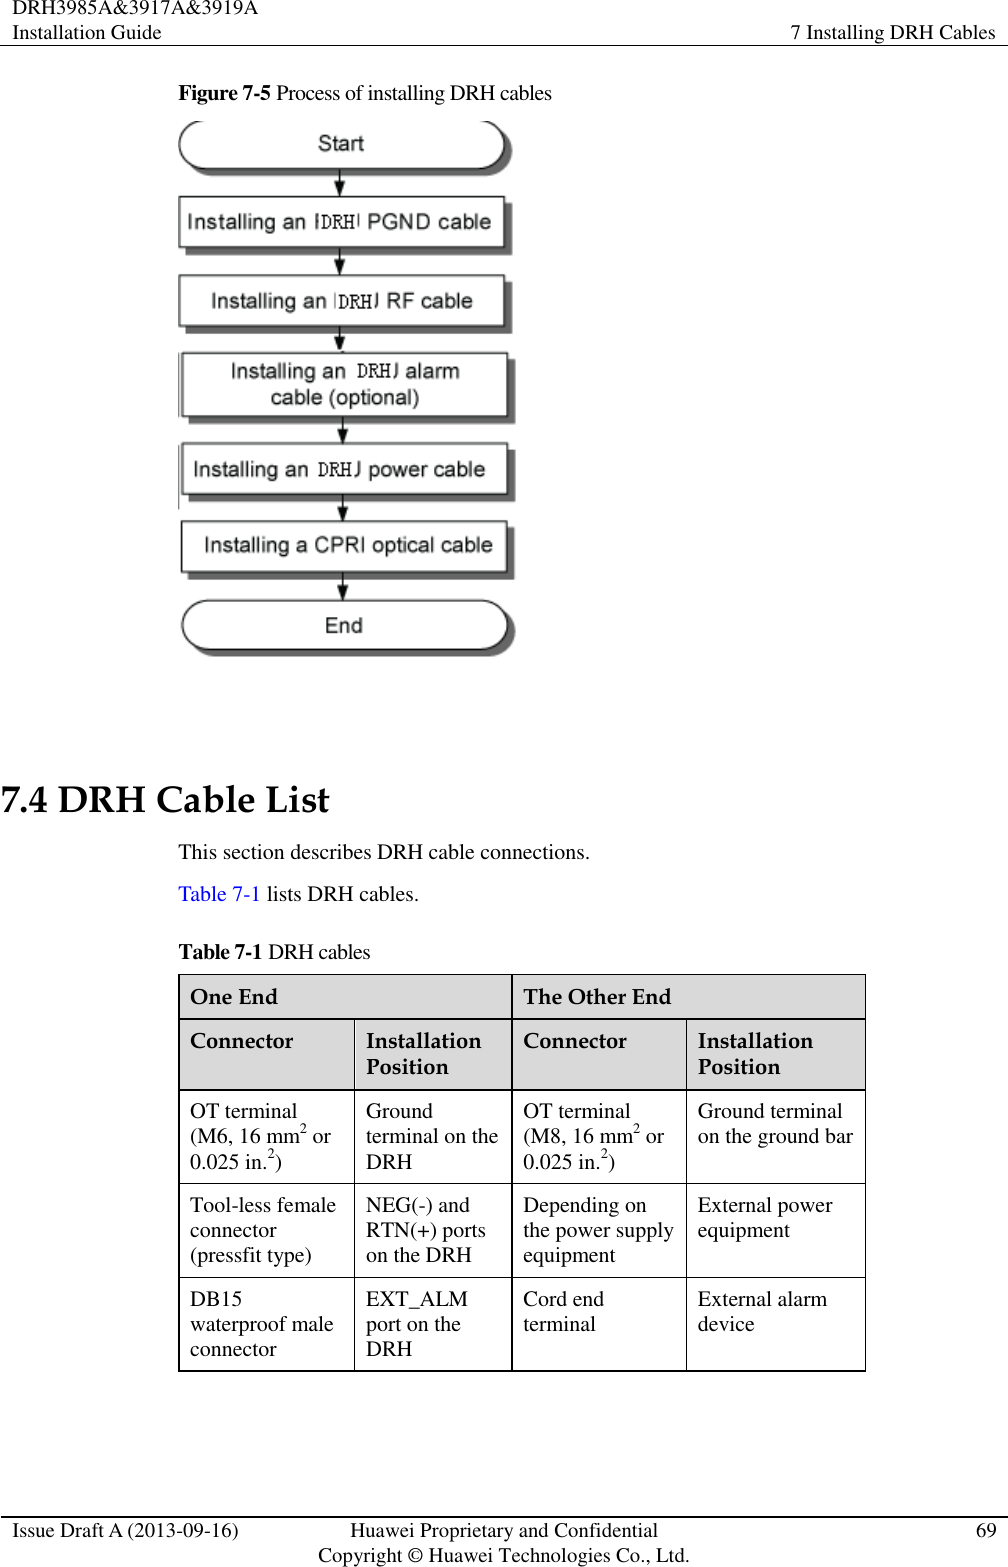 DRH3985A&amp;3917A&amp;3919A Installation Guide 7 Installing DRH Cables  Issue Draft A (2013-09-16) Huawei Proprietary and Confidential                                     Copyright © Huawei Technologies Co., Ltd. 69  Figure 7-5 Process of installing DRH cables   7.4 DRH Cable List This section describes DRH cable connections. Table 7-1 lists DRH cables. Table 7-1 DRH cables One End The Other End Connector Installation Position Connector Installation Position OT terminal (M6, 16 mm2 or 0.025 in.2) Ground terminal on the DRH OT terminal (M8, 16 mm2 or 0.025 in.2) Ground terminal on the ground bar Tool-less female connector (pressfit type) NEG(-) and RTN(+) ports on the DRH Depending on the power supply equipment External power equipment DB15 waterproof male connector EXT_ALM port on the DRH Cord end terminal External alarm device 